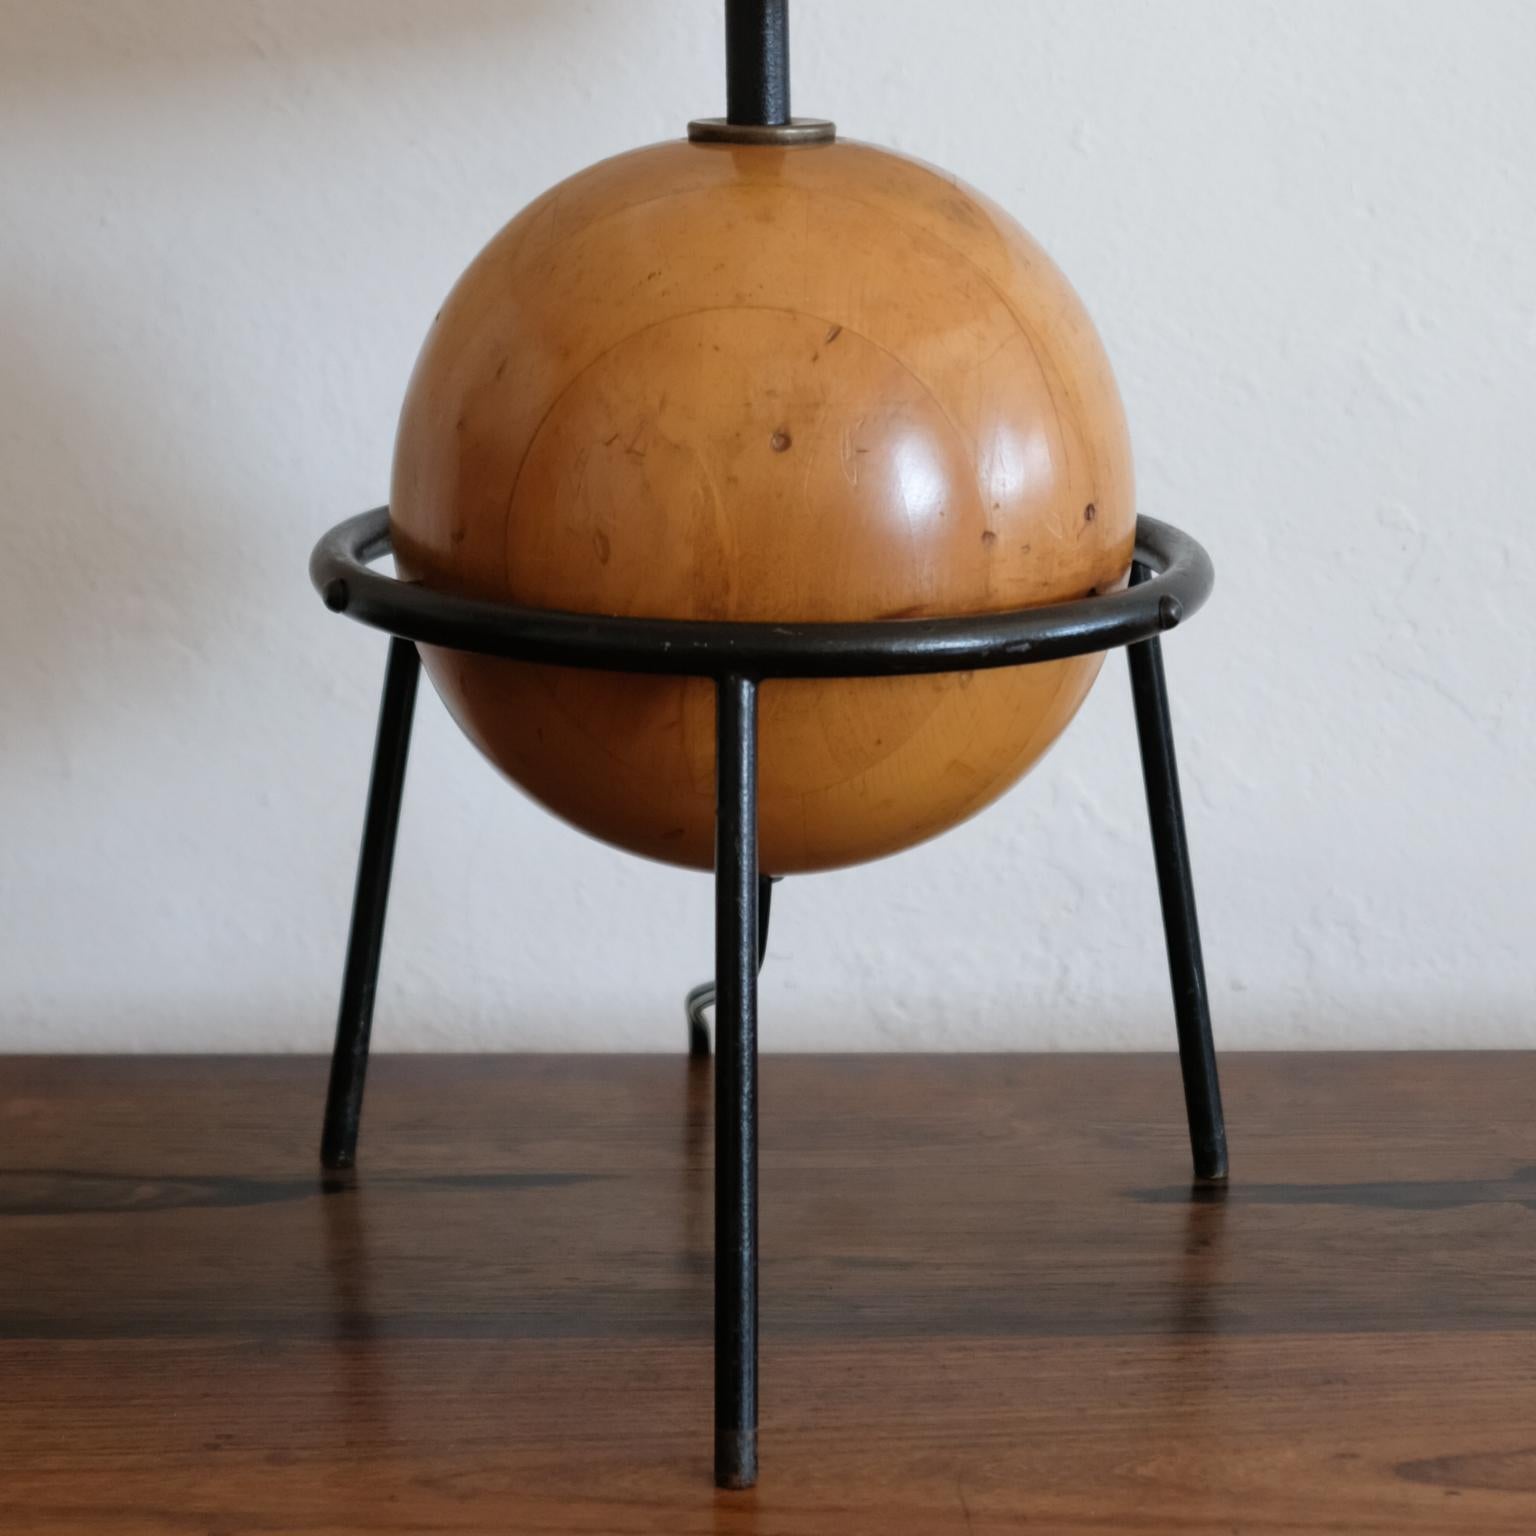 California Modern Iron and Wood Lamps by Albert Blake, 1951 In Good Condition For Sale In San Diego, CA